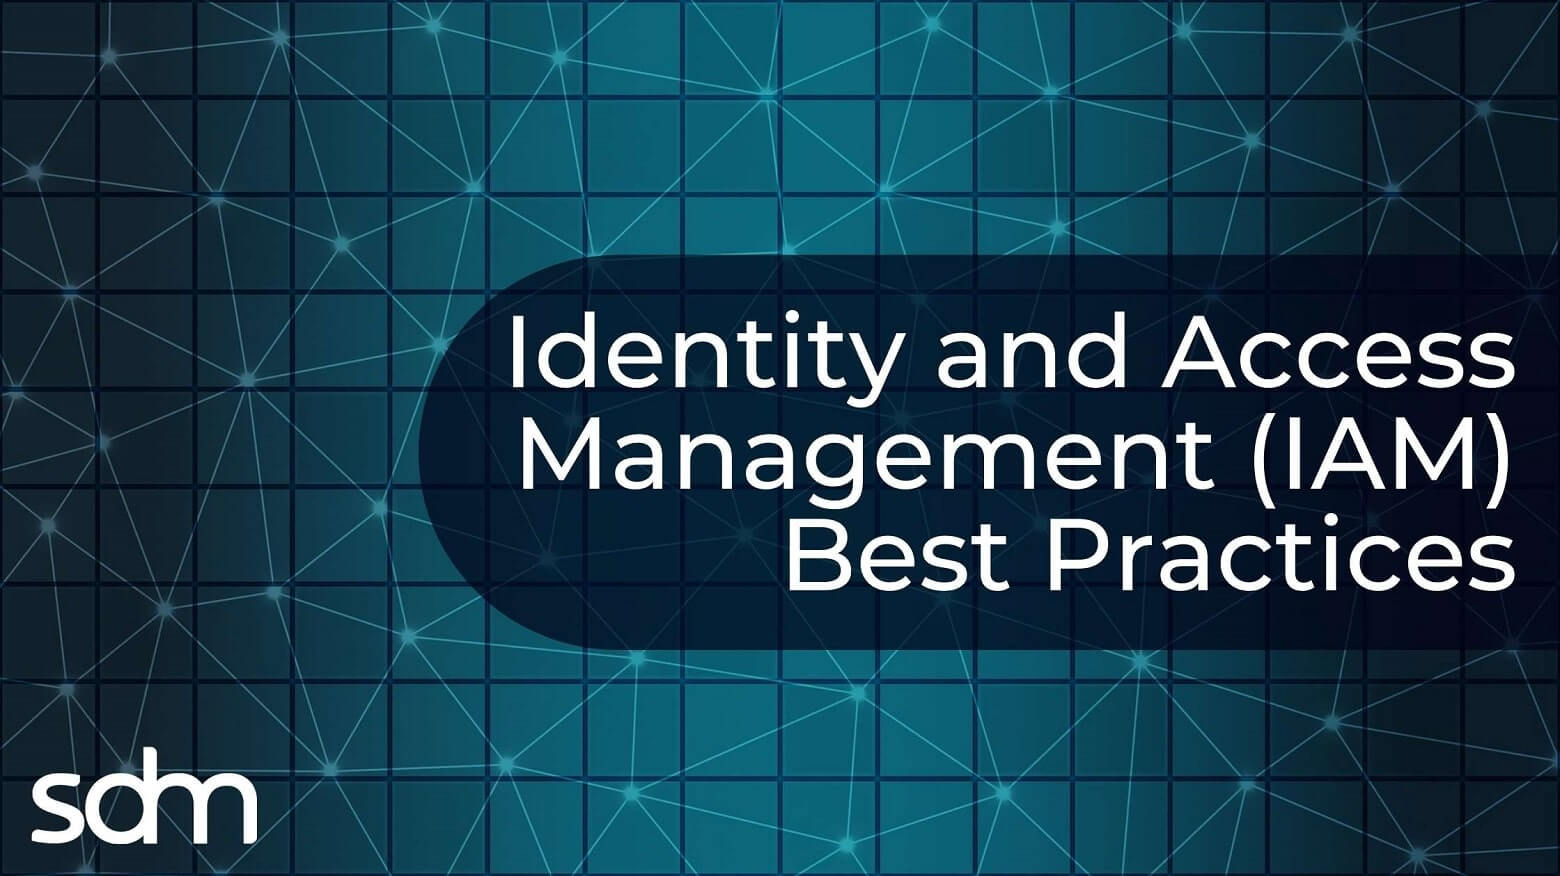 Identity and Access Management (IAM) Best Practices